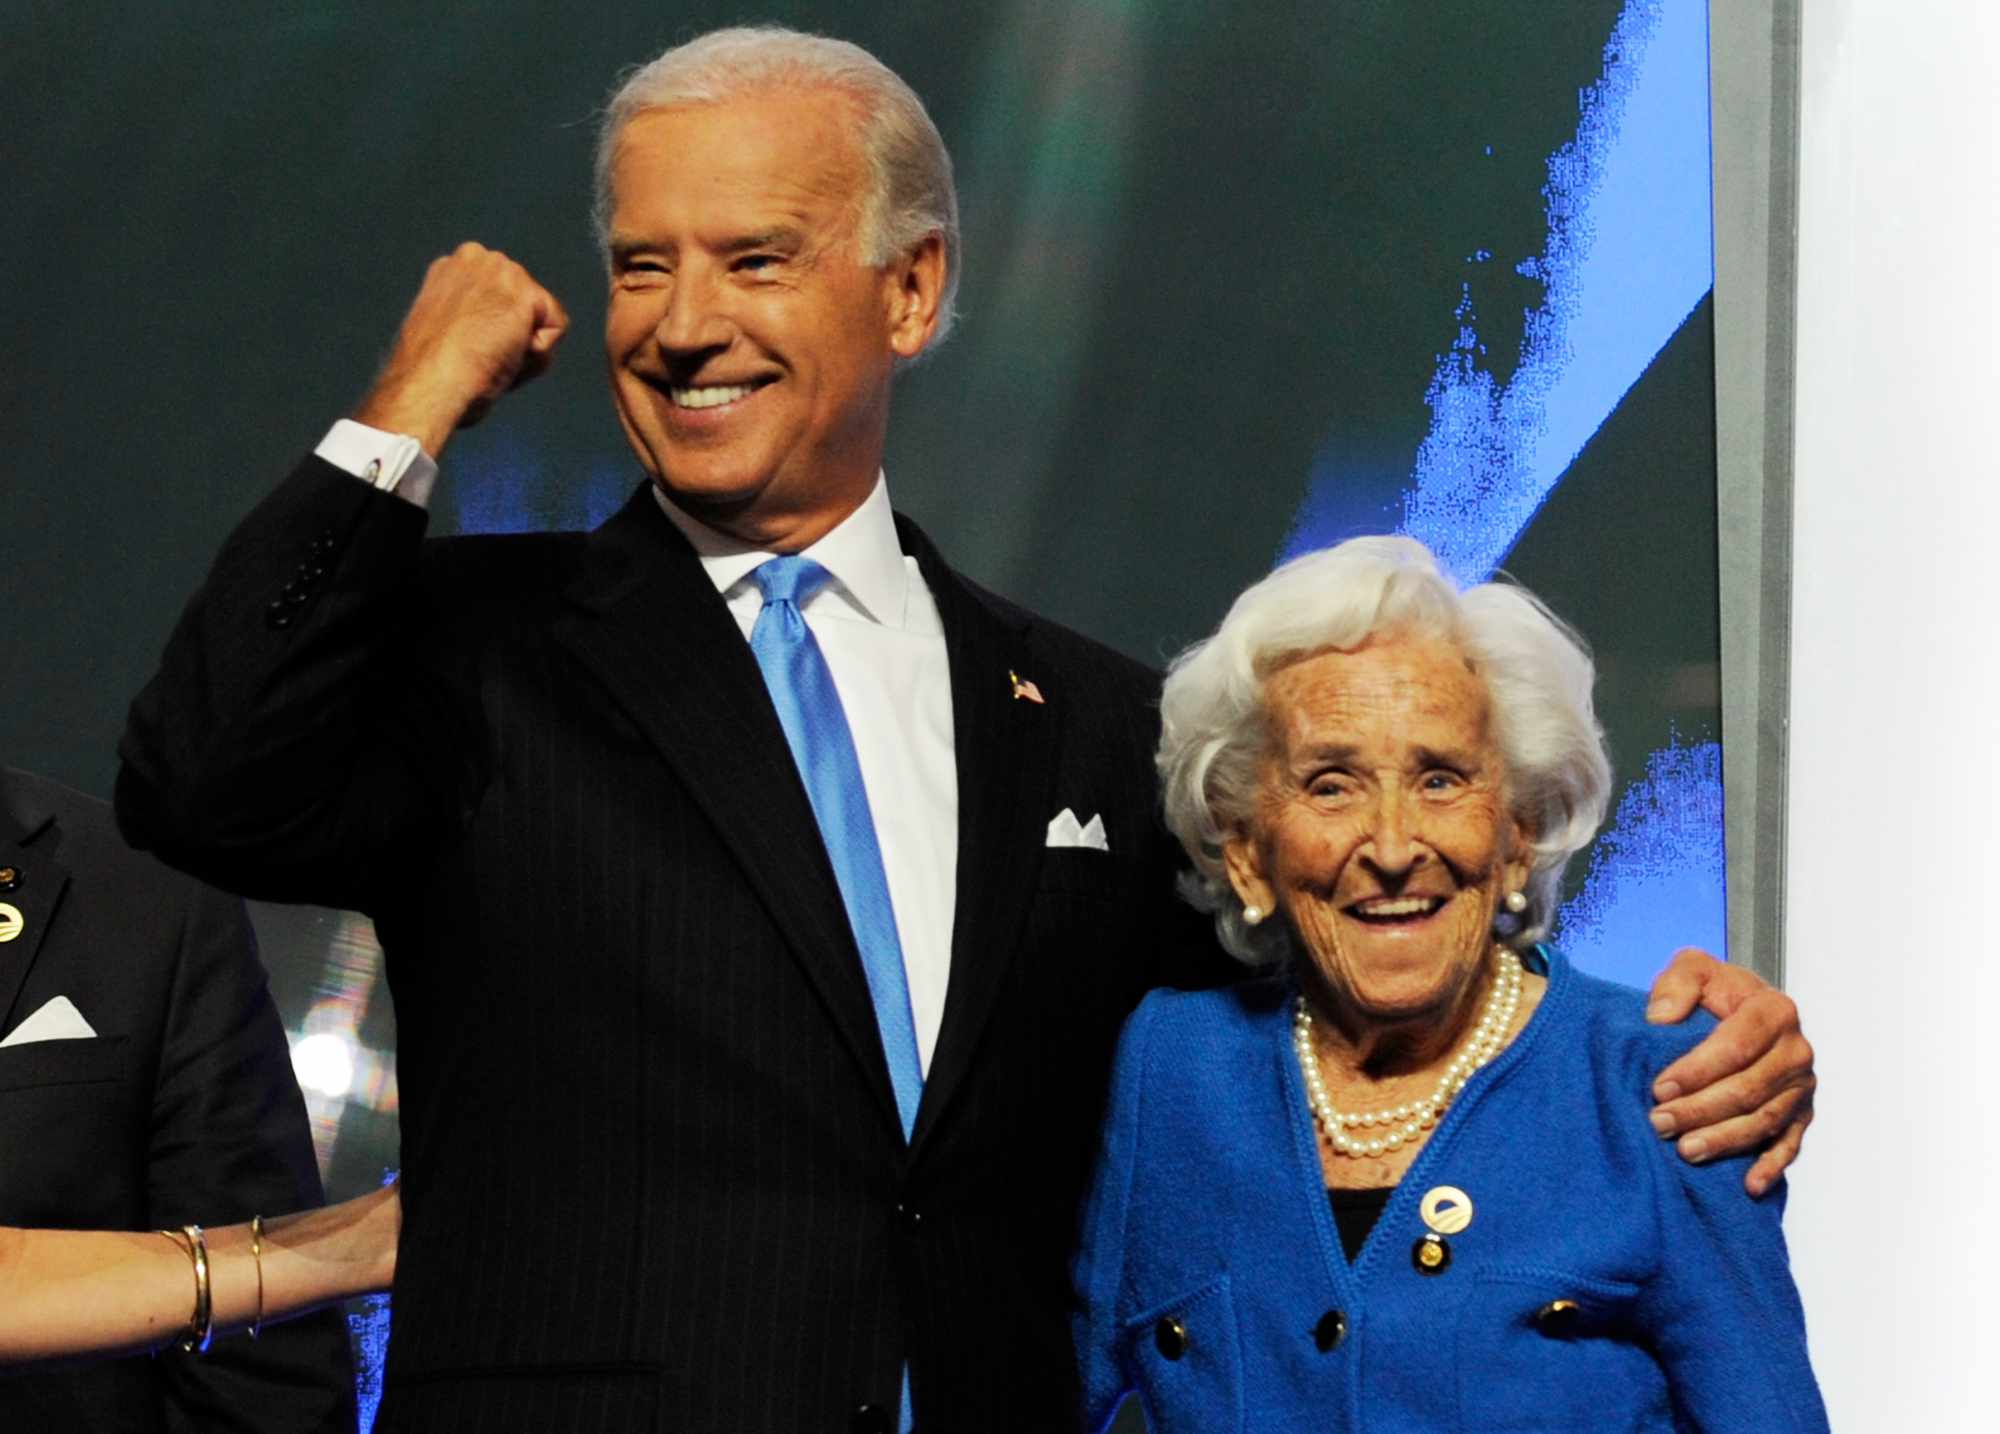 Joe Biden on stage after his speech with his mother, Jean, at the Pepsi Center during the third day of the Democratic National Convention on August 27, 2008.